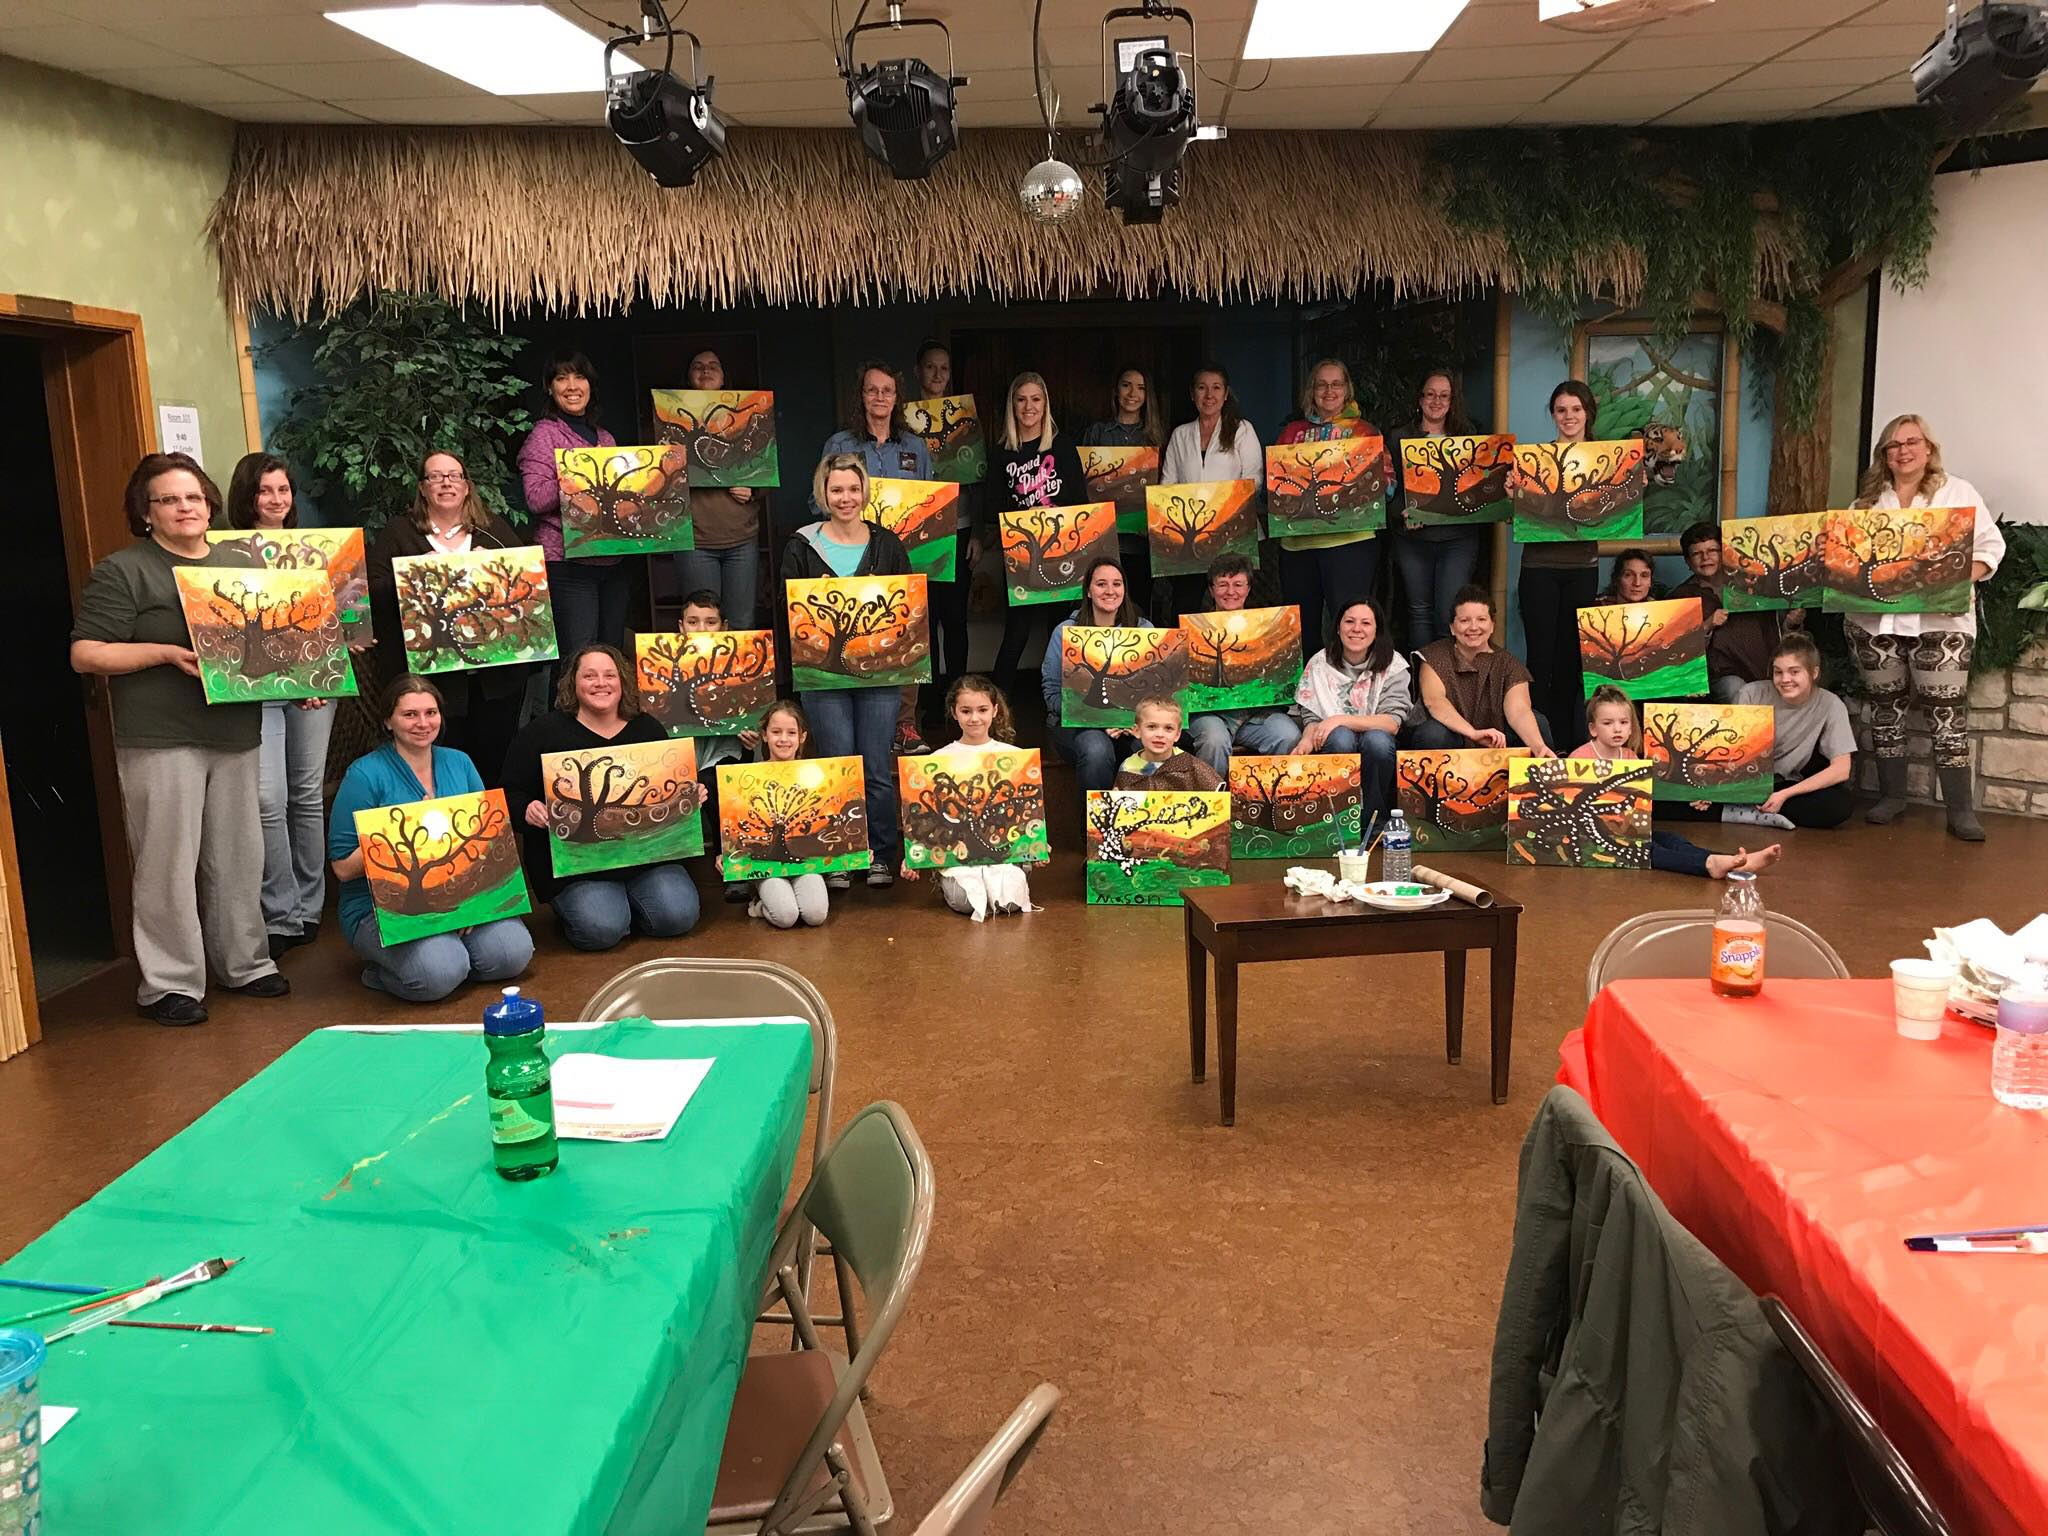 2017-01-17 Inspired Sisters Women's Ministry of Zions Church - Be Social Let's Make a Painting